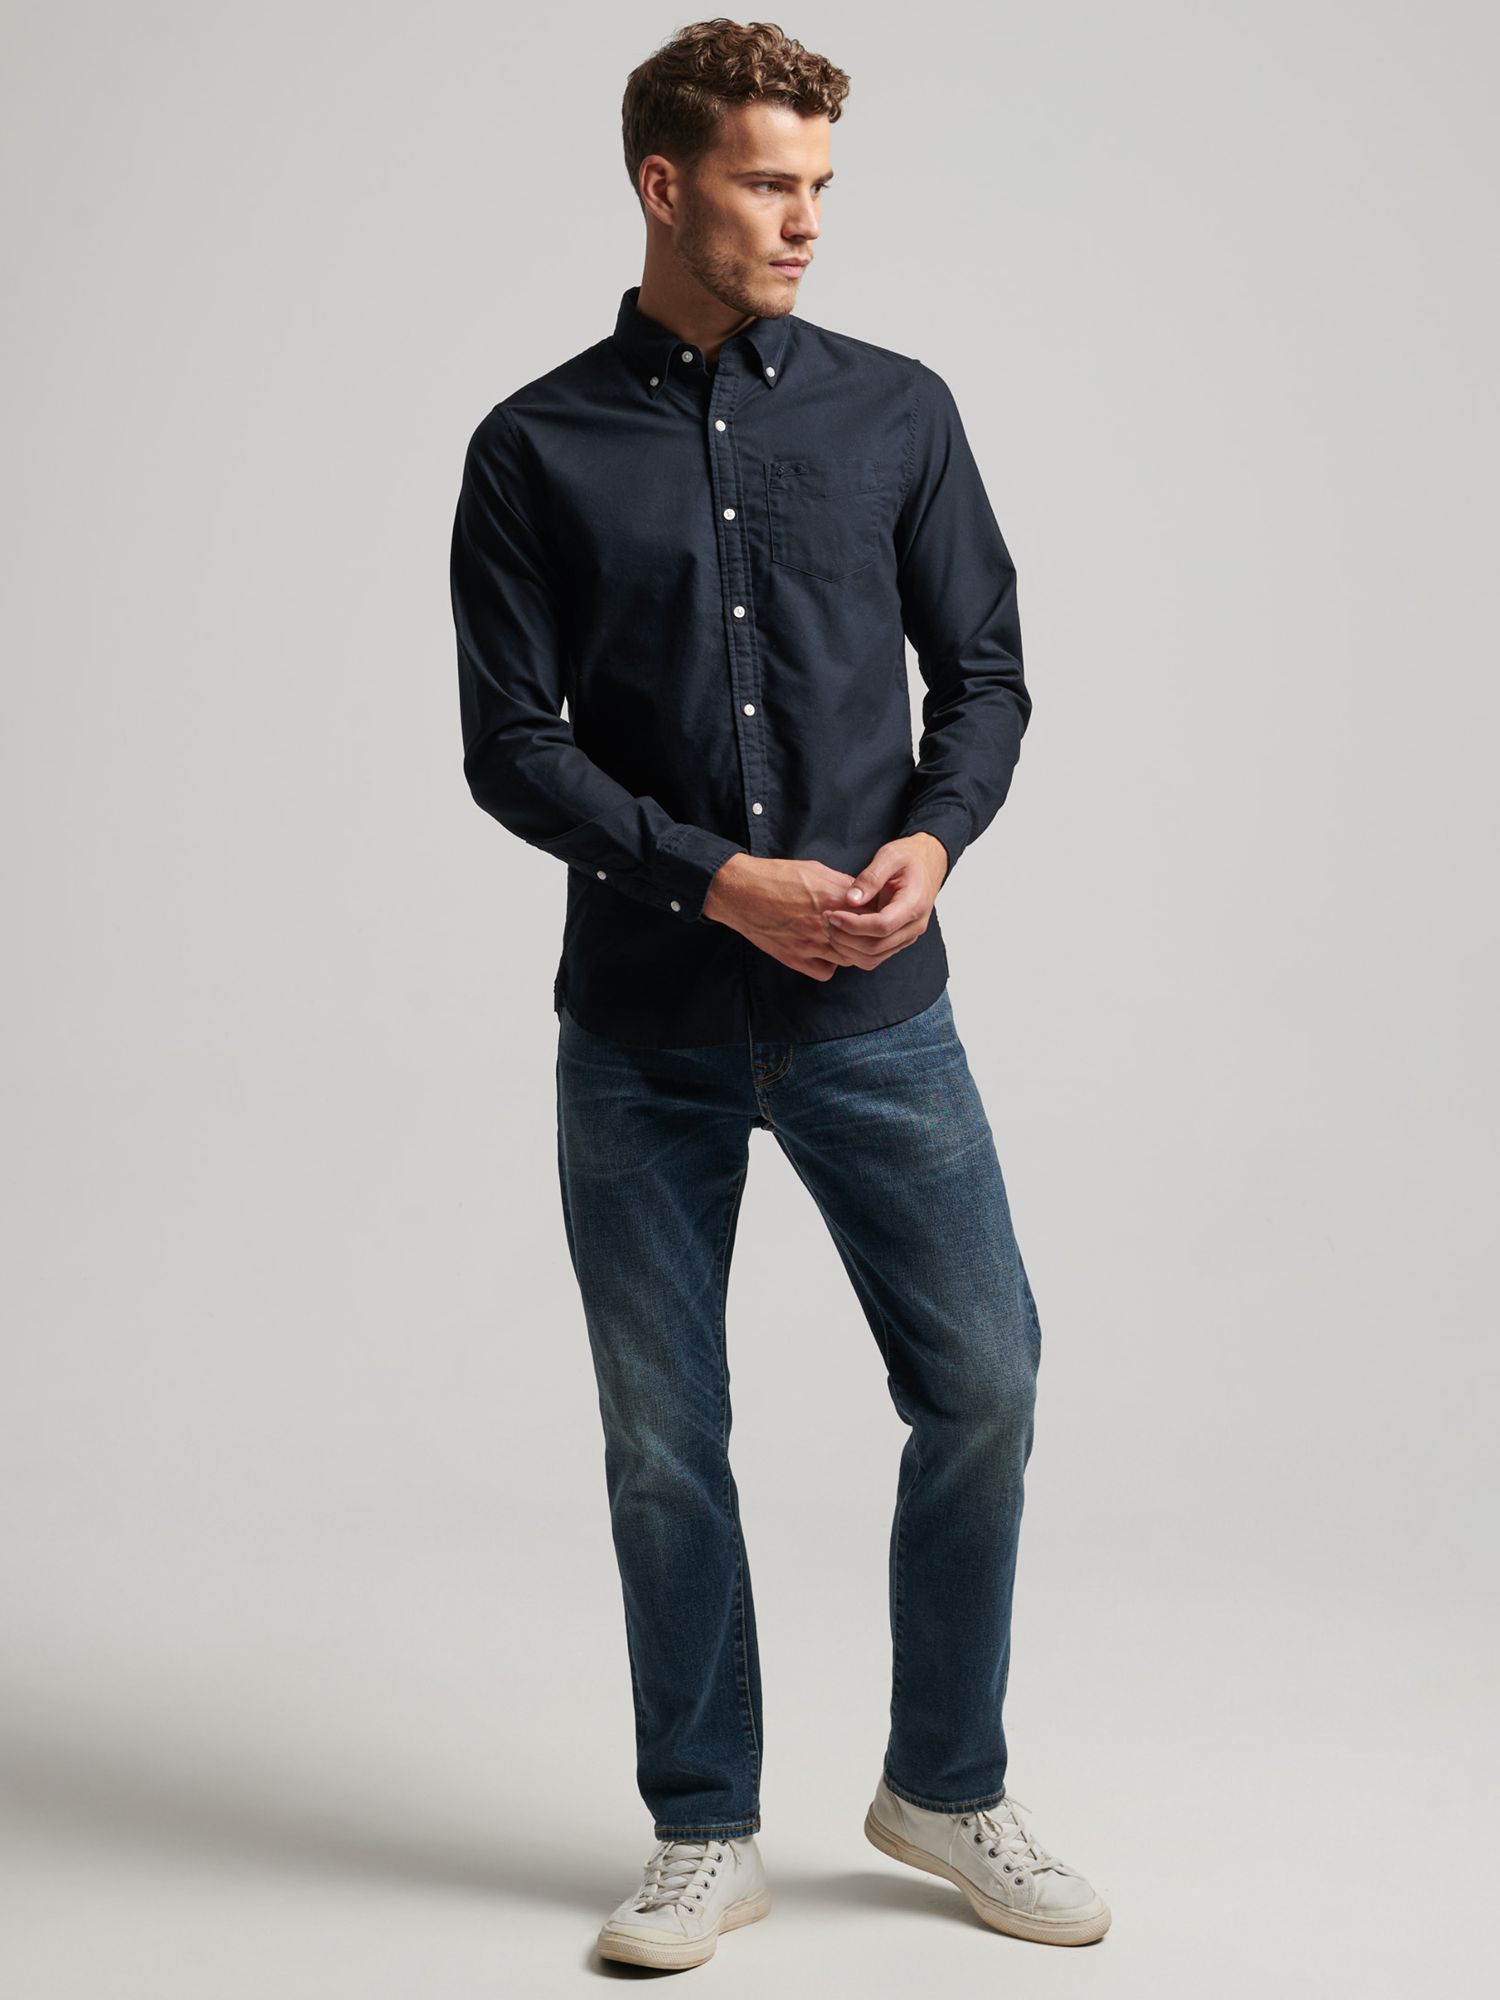 Superdry Washed Oxford Shirt, Eclipse Navy at John Lewis & Partners